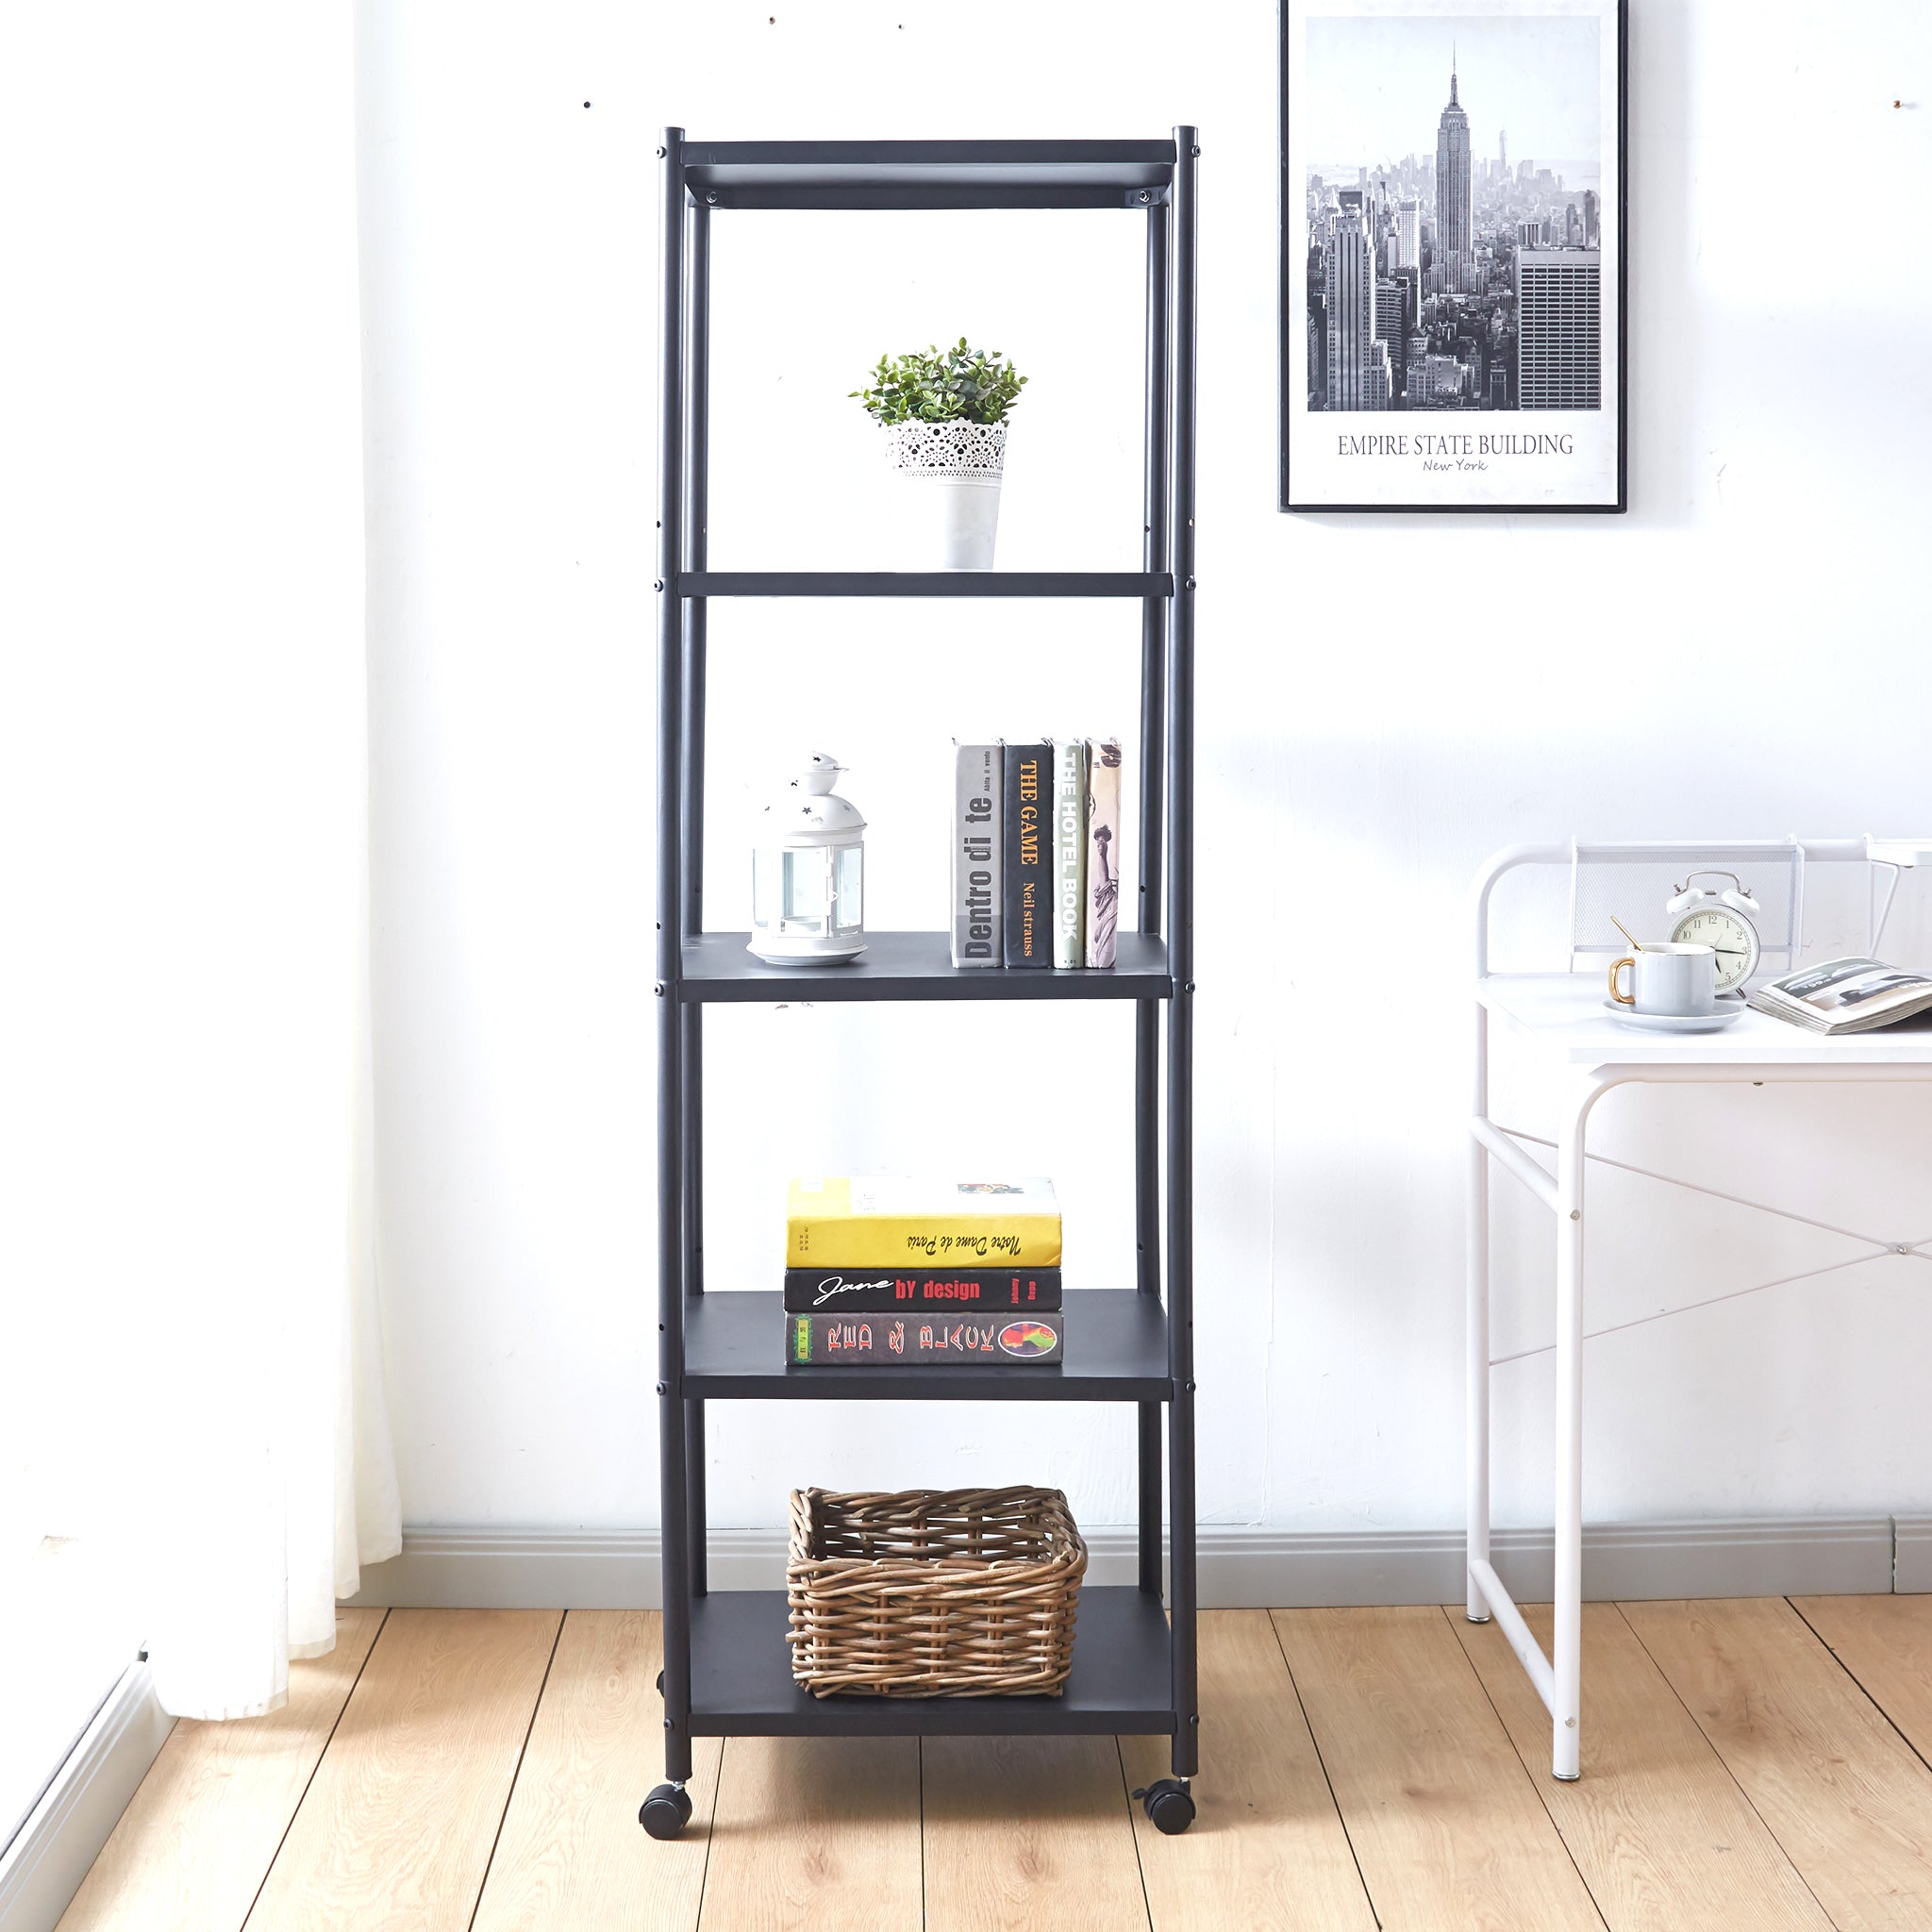 Mobile Kitchen Shelf with 5 Shelves model SF-110 for organized storage4